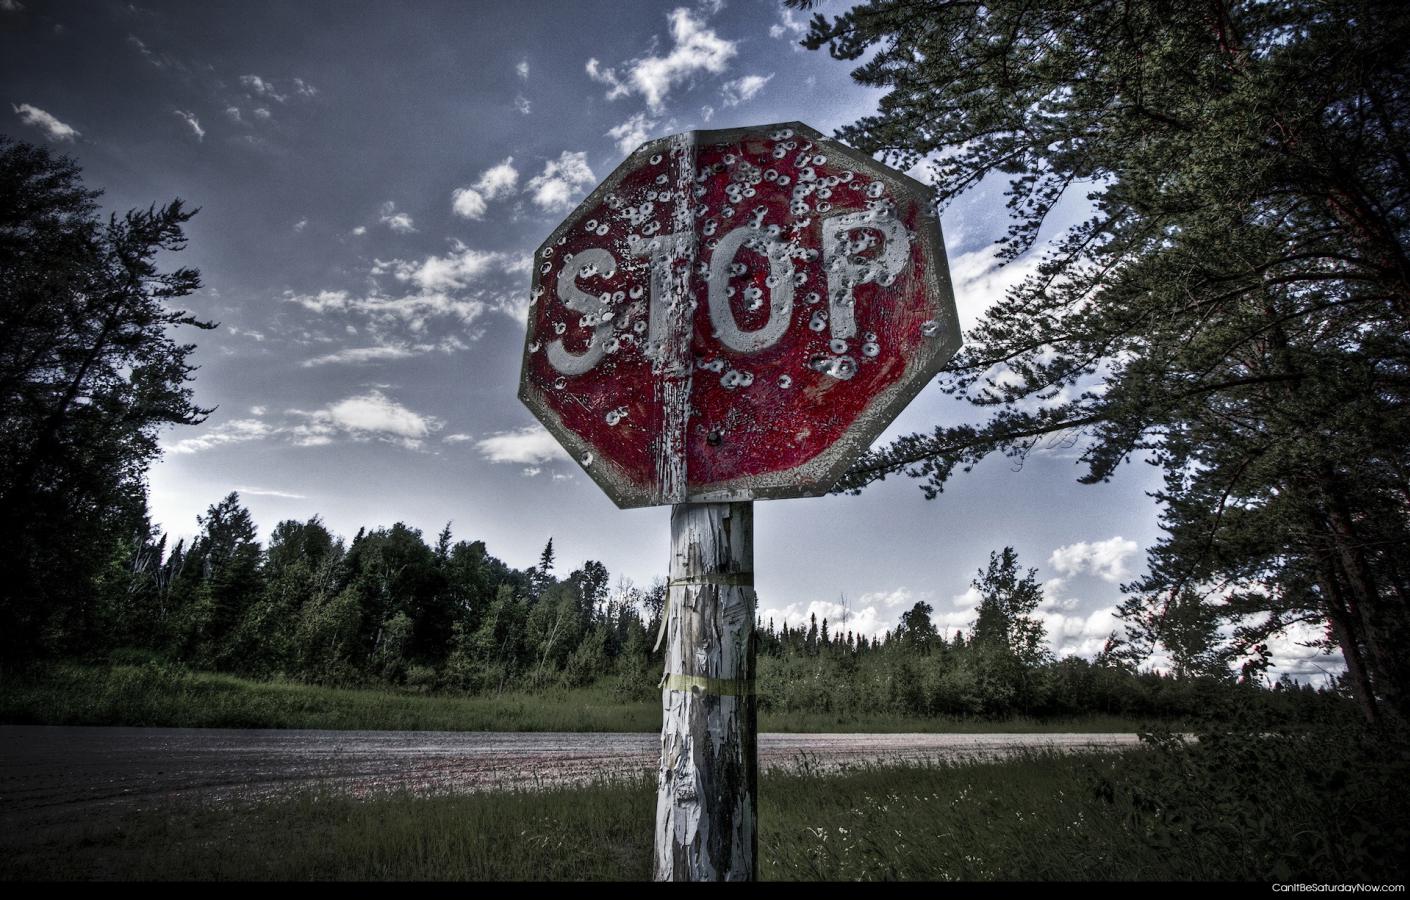 Shot stop sign - people like to shoot stop signs